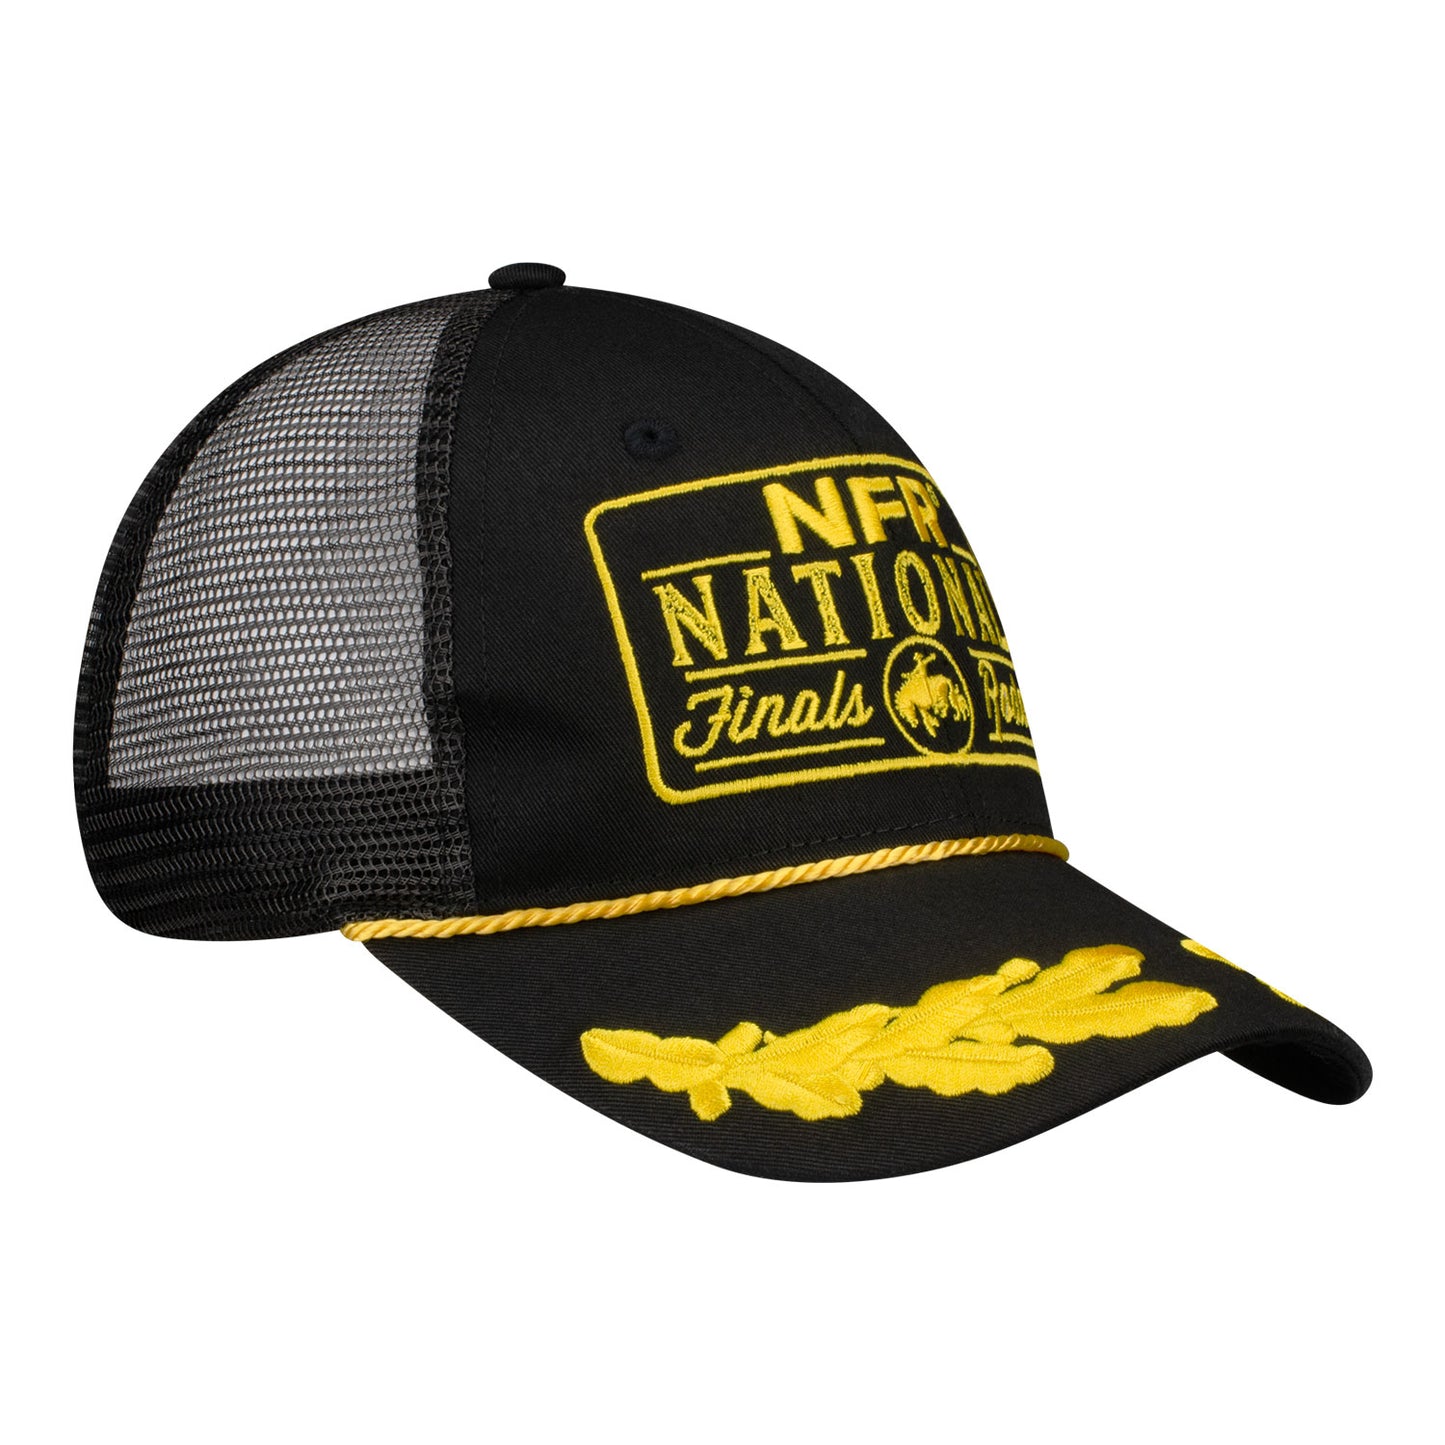 NFR Captain's Hat in Black - Angled Right Side View